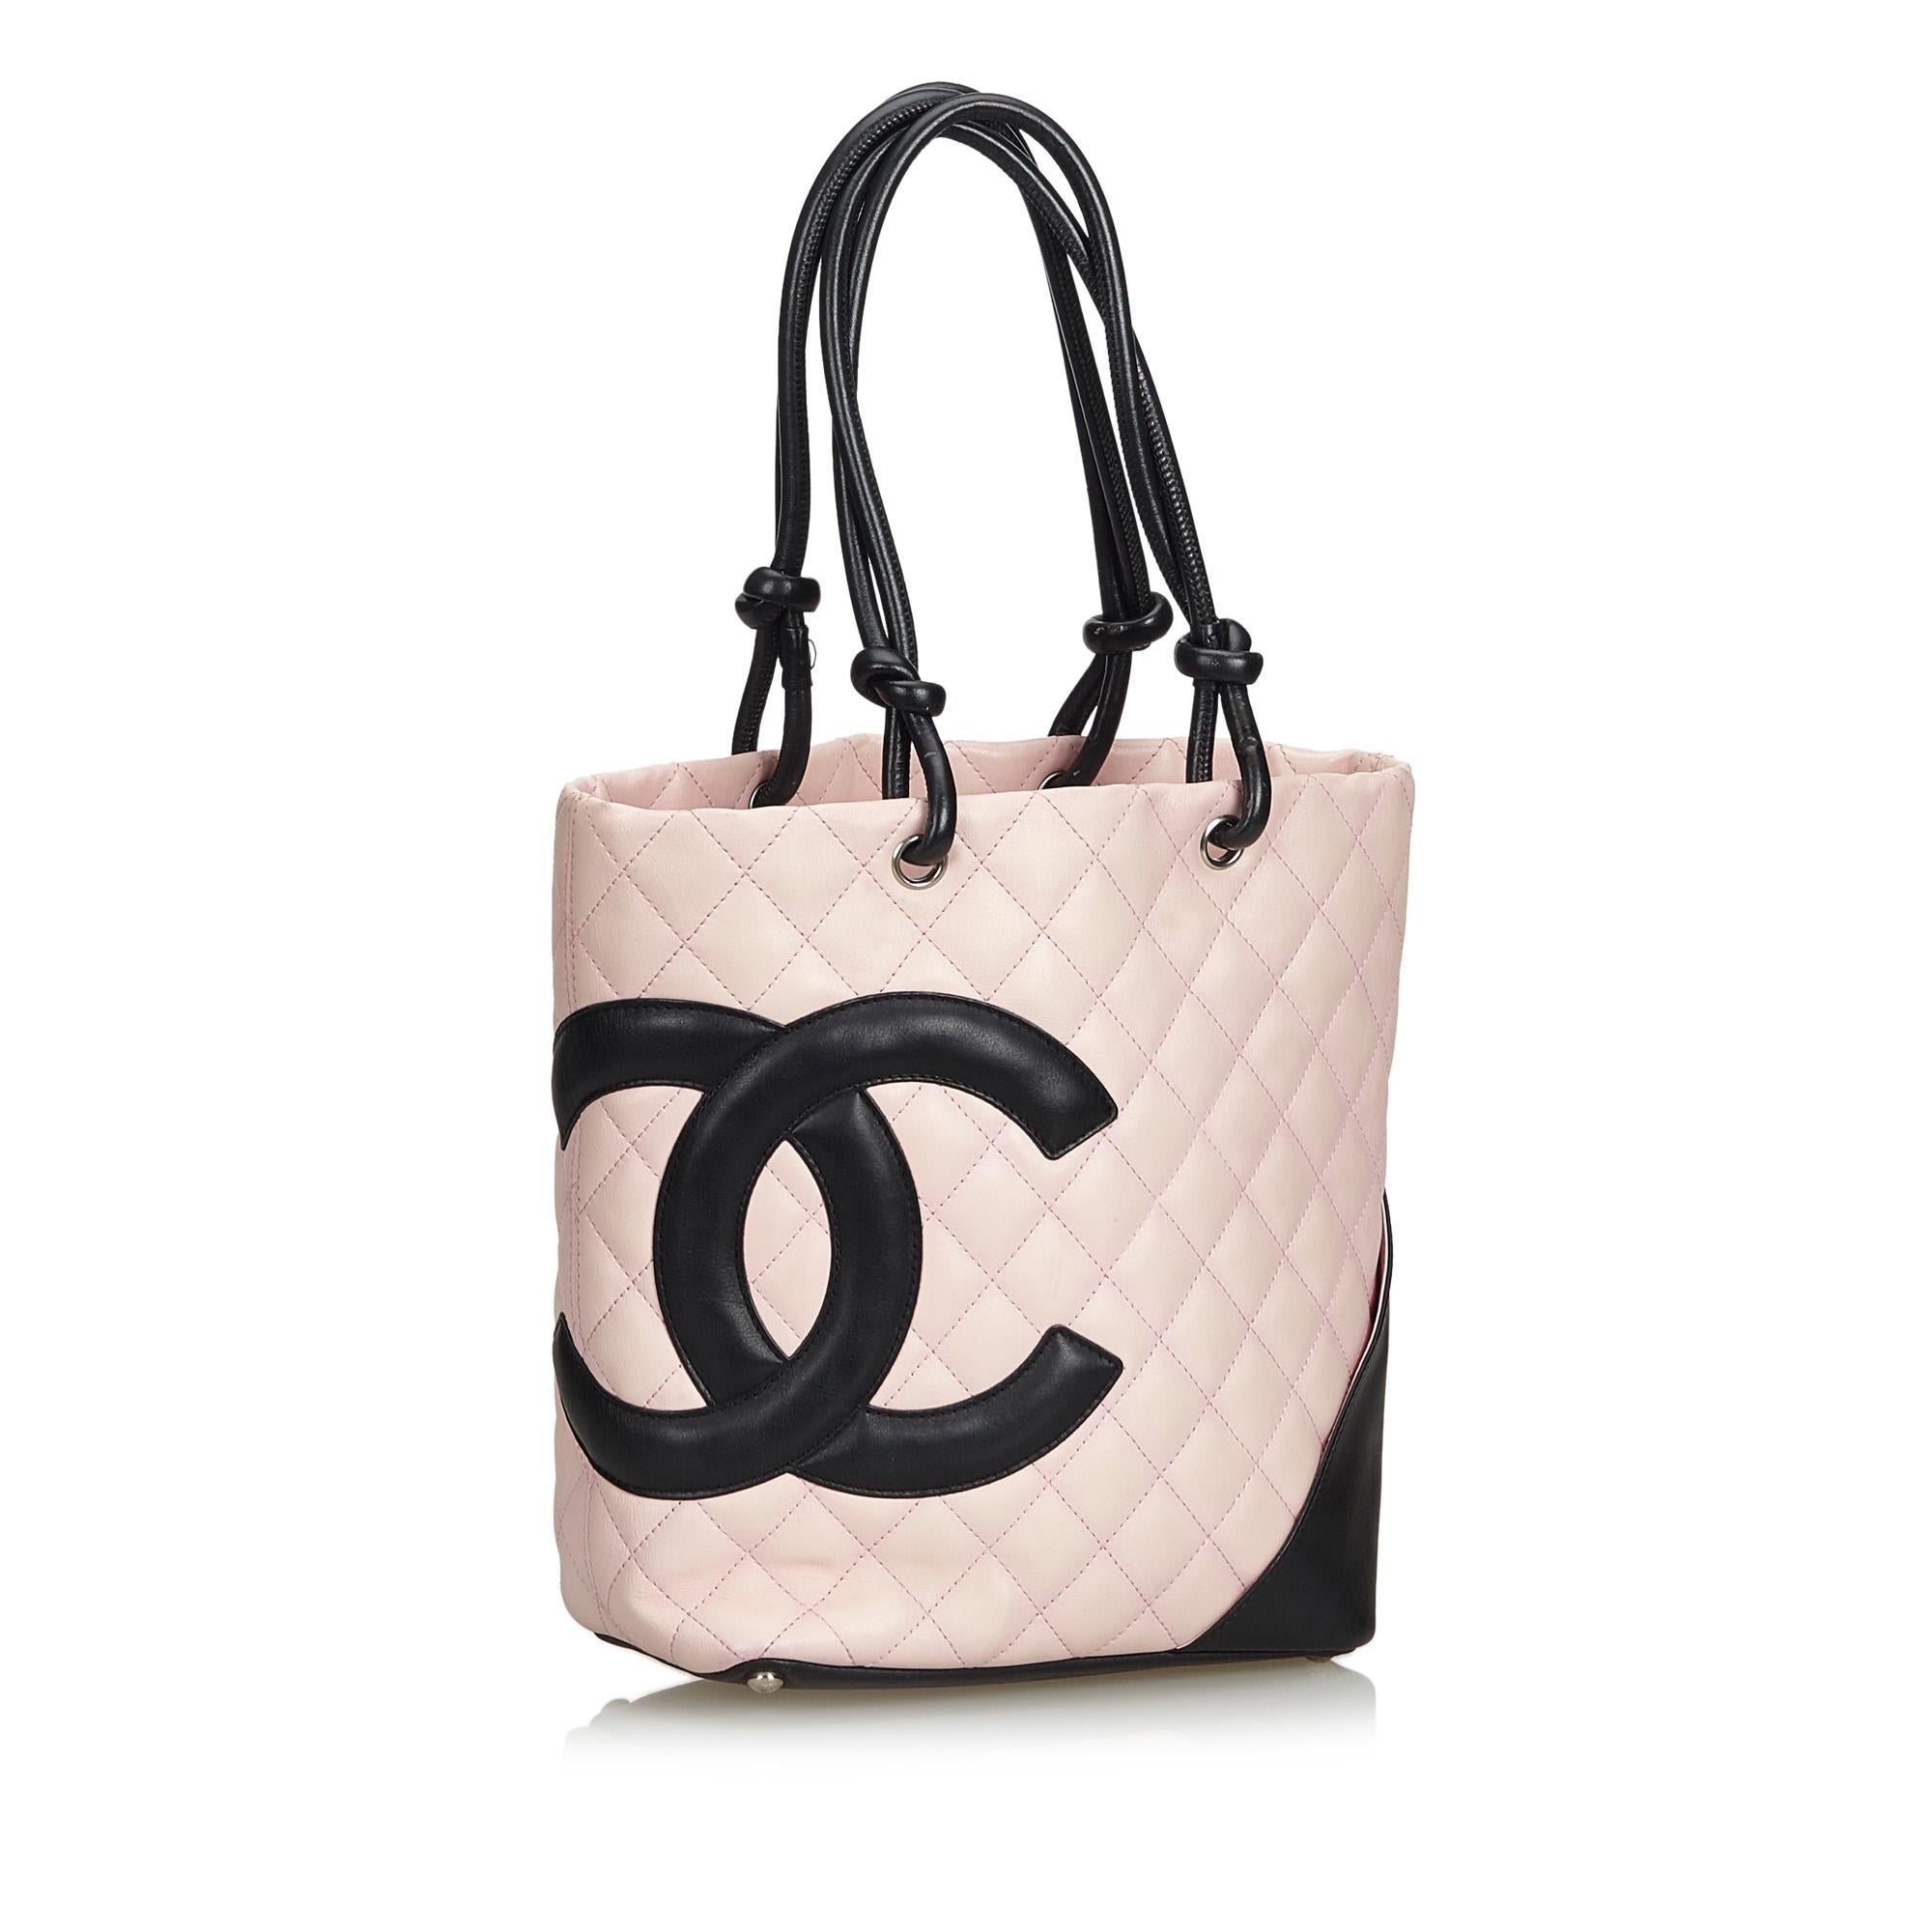 The Cambon Ligne tote features a quilted leather body and interlocking Cs, rolled leather handles, top zip closure, exterior back slip pocket, and interior zip pockets. It carries as B condition rating.

Inclusions: 
This item does not come with